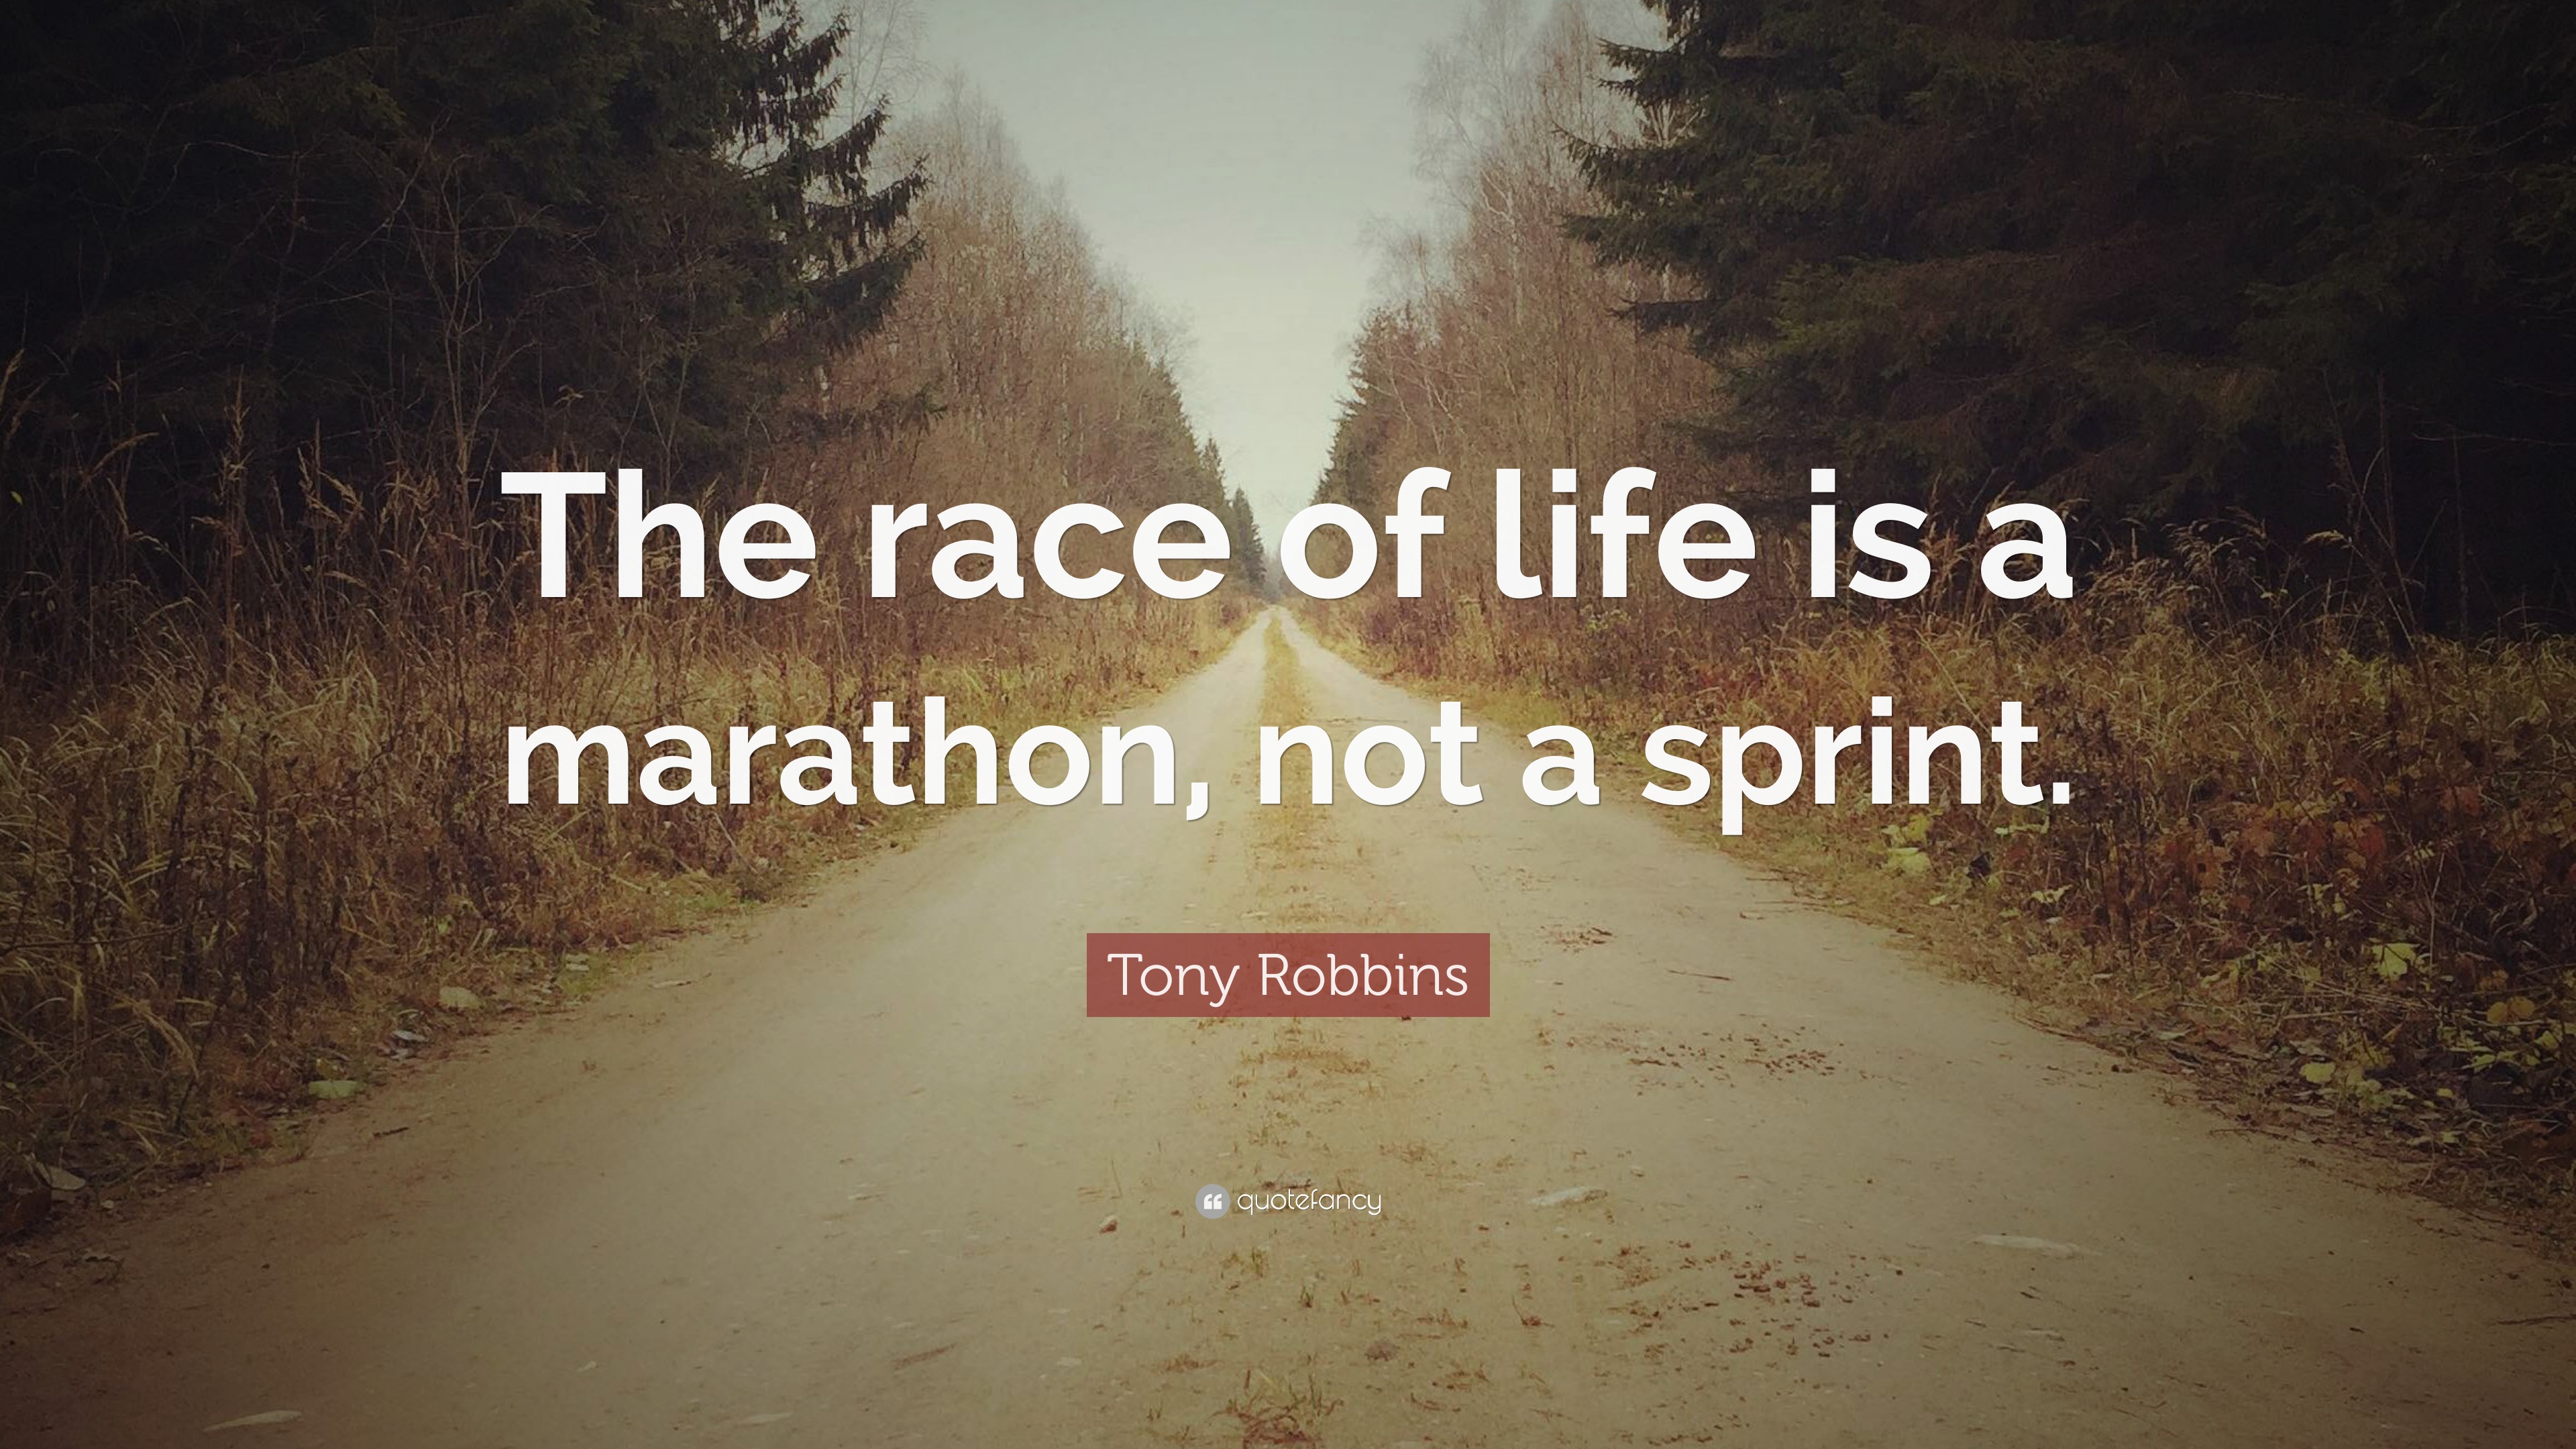 Tony Robbins Quote “The race of life is a marathon, not a sprint.” (12